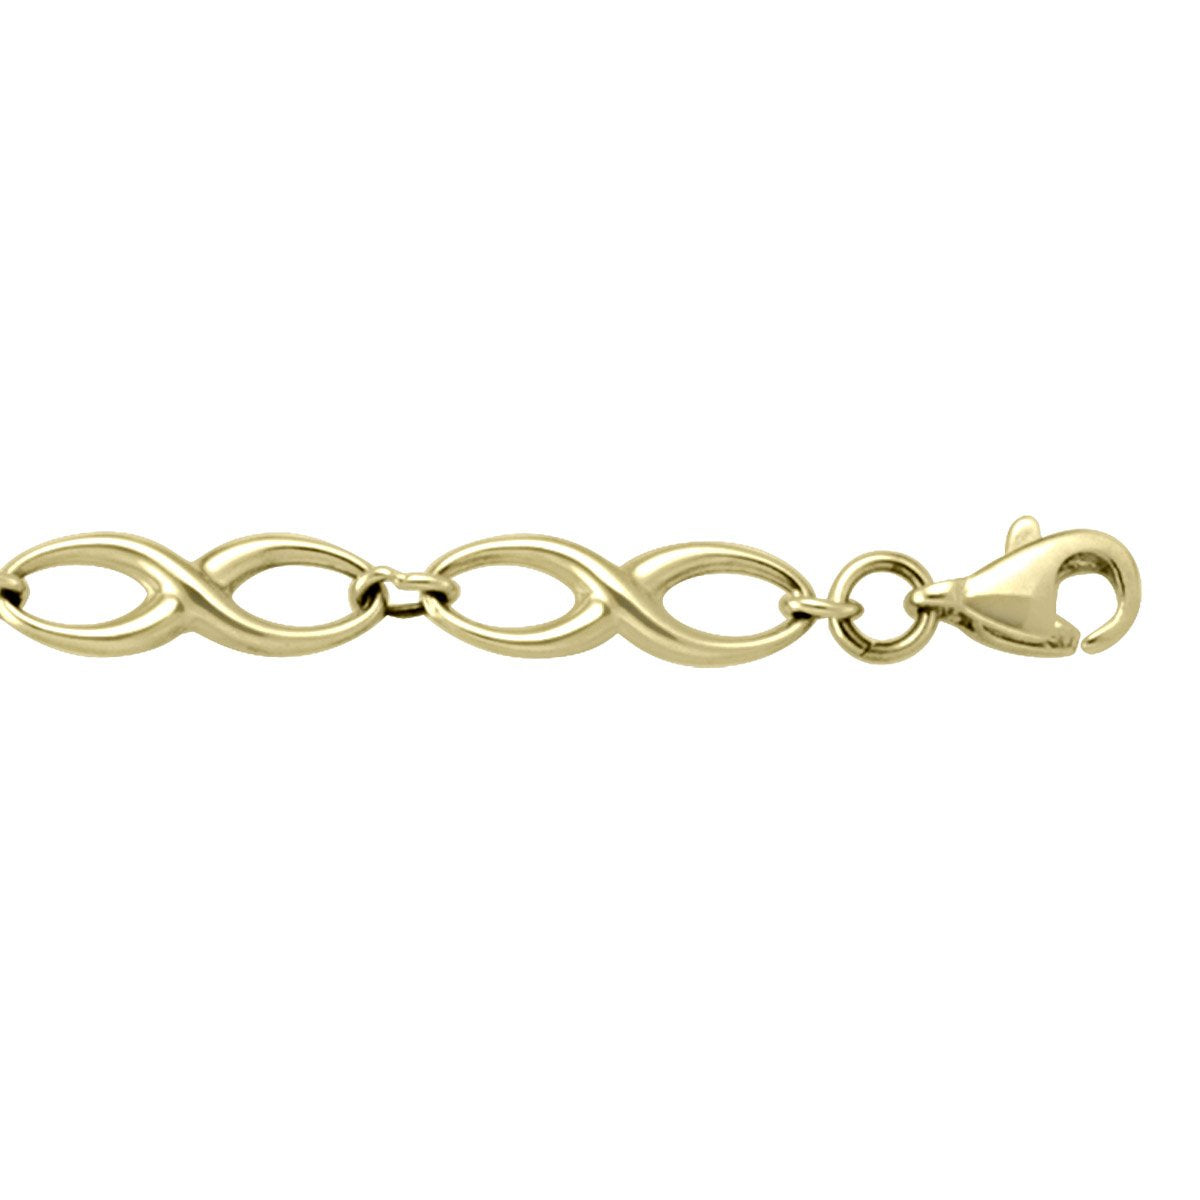 BRACELETS YELLOW GOLD INFINITY HOLLOW LINK 